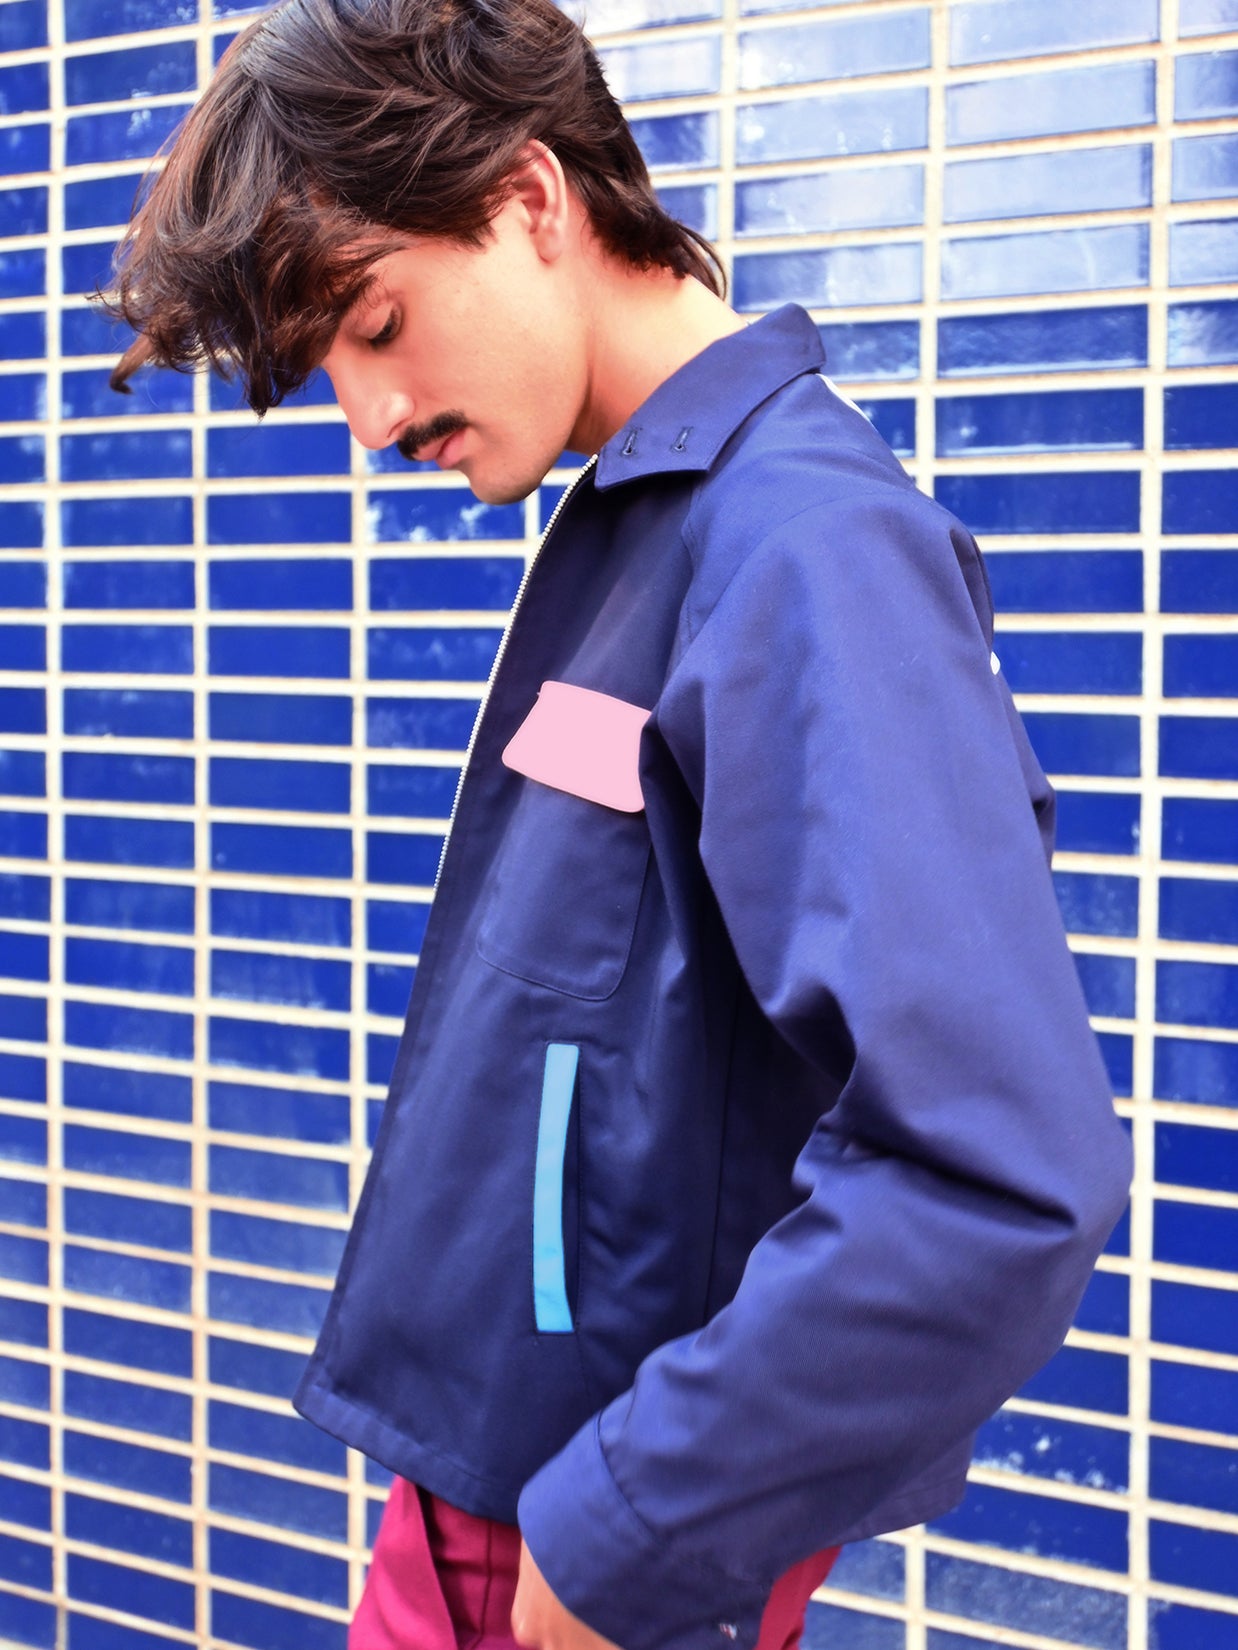 "In the navy" color block Jacket design by Natali Koromoto's in-house clothing brand Ho Hos Hole in The Wall. Made in NYC with Eco-Twill, a combo organic cotton and polyester spun from recycled water and soda bottles.